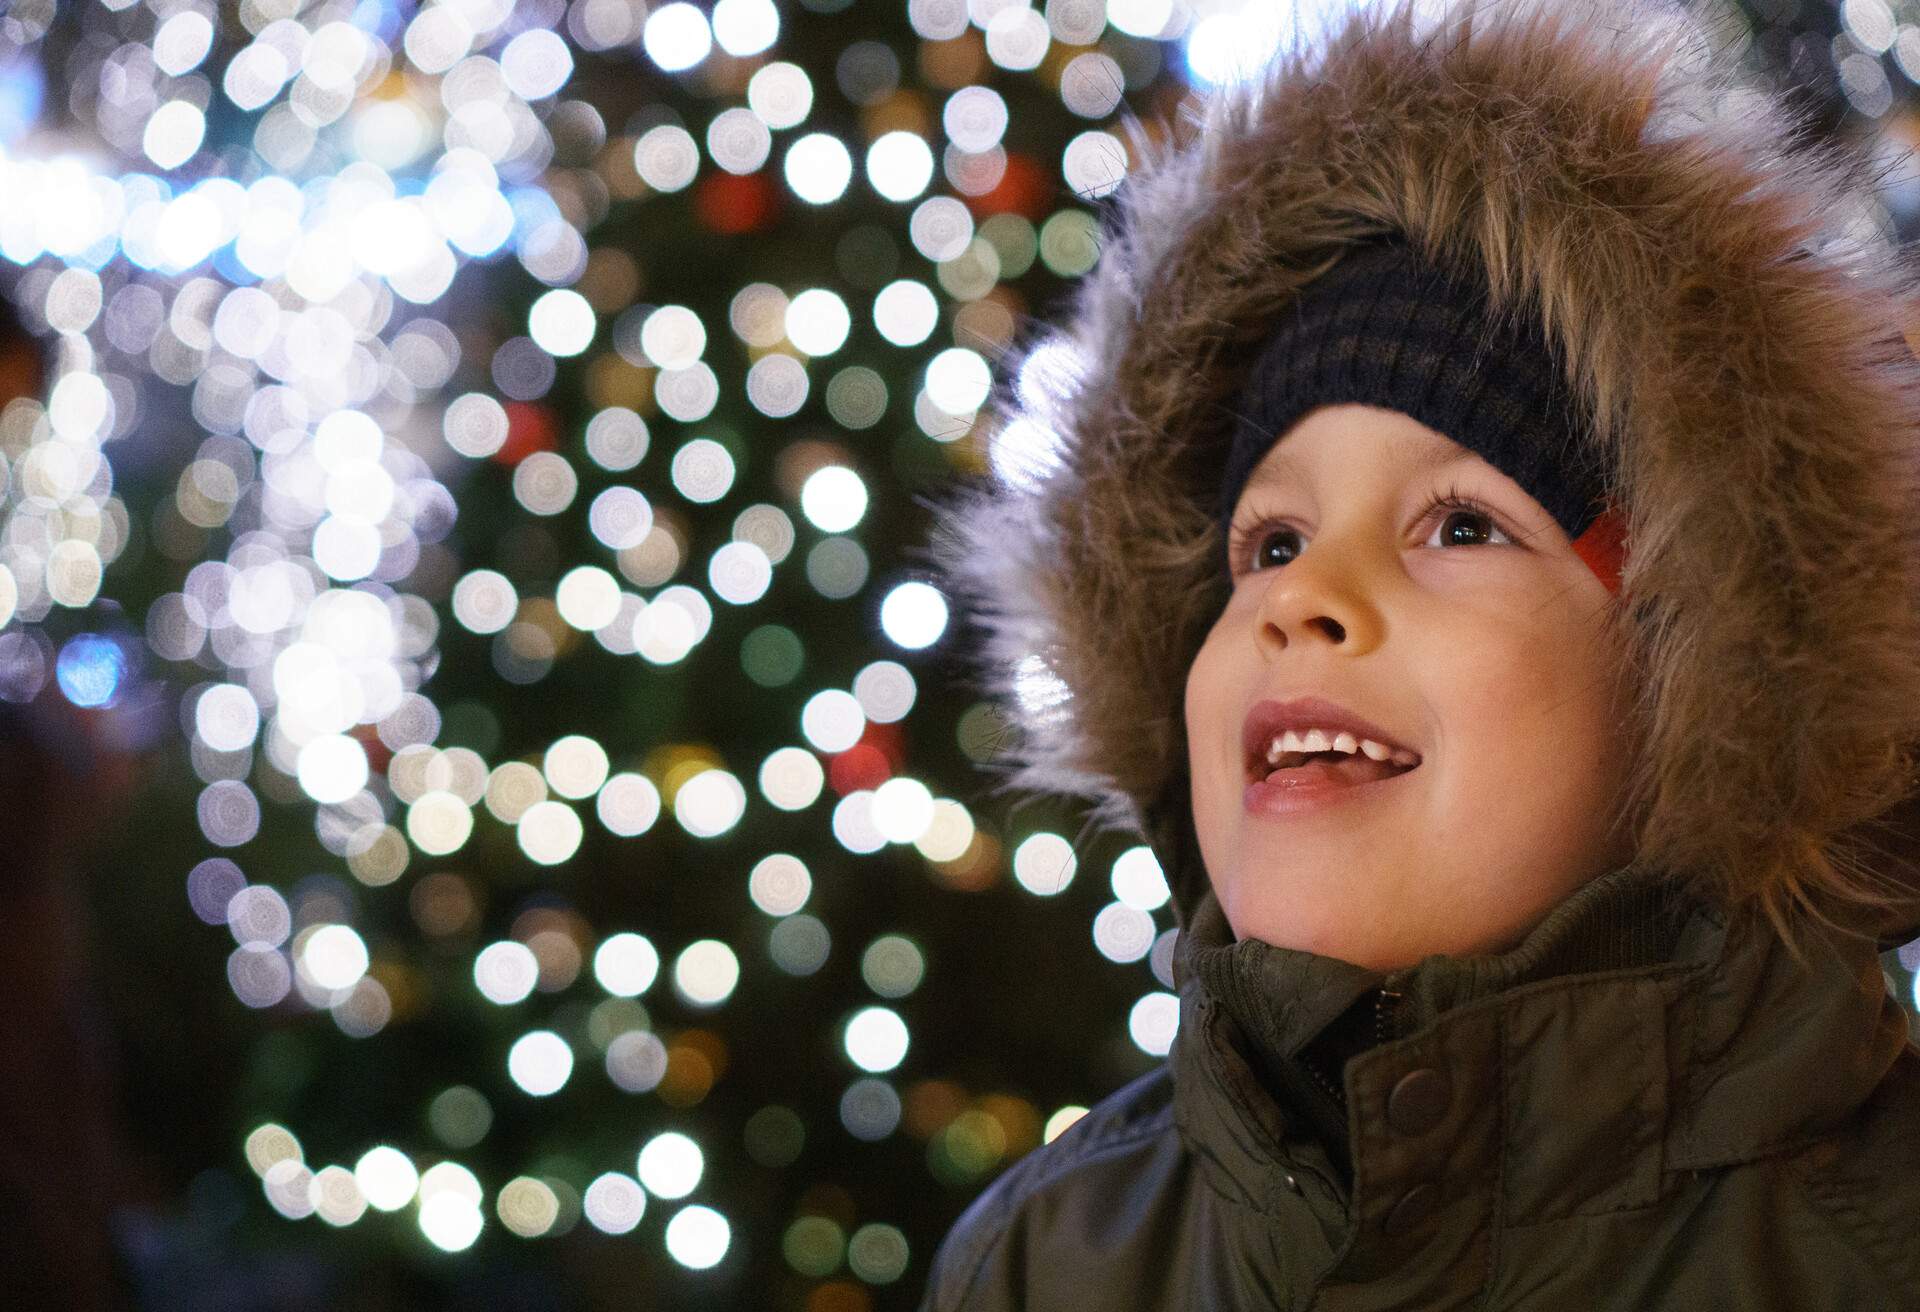 A little boy's mesmerised facial expression and blurry Christmas lights in the background.